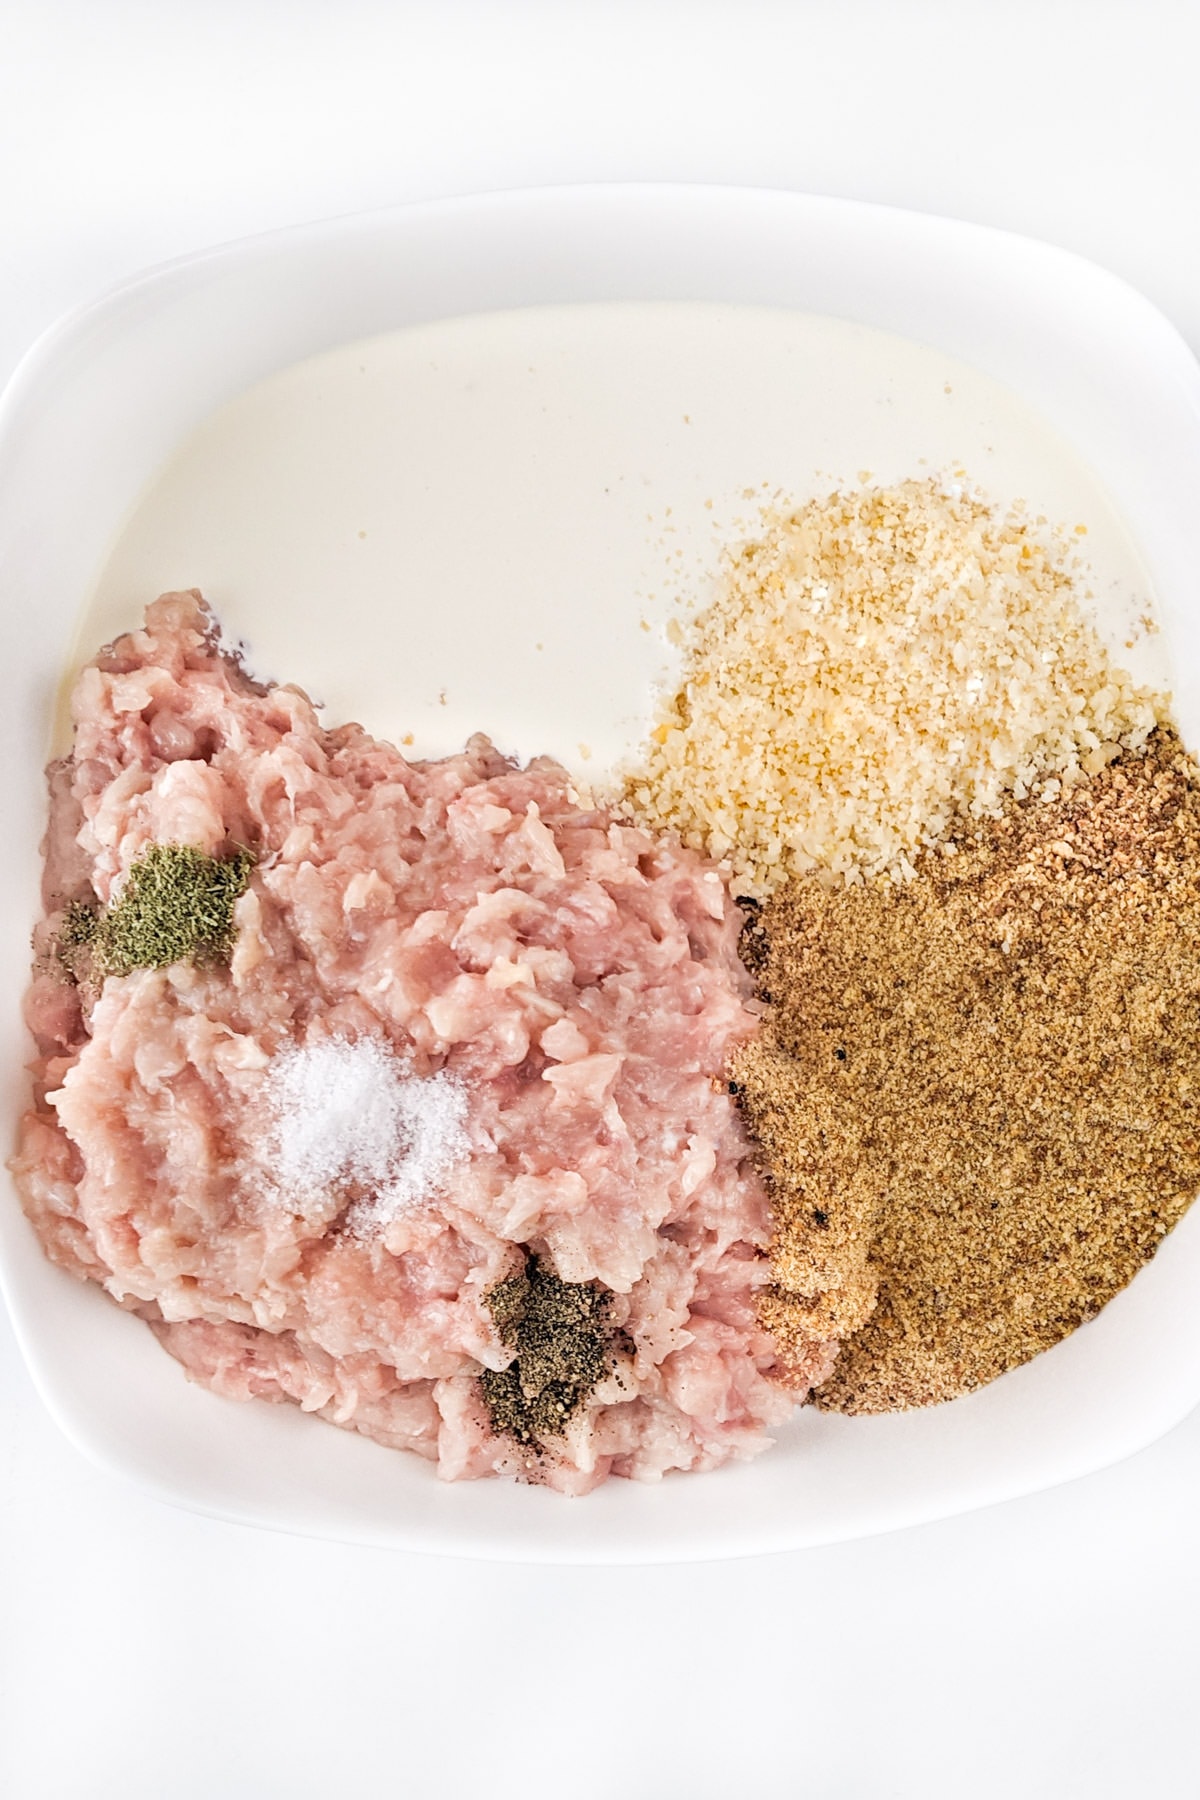 Plate with ground chicken meat, breadcrumbs, parmesan and whipped cream.